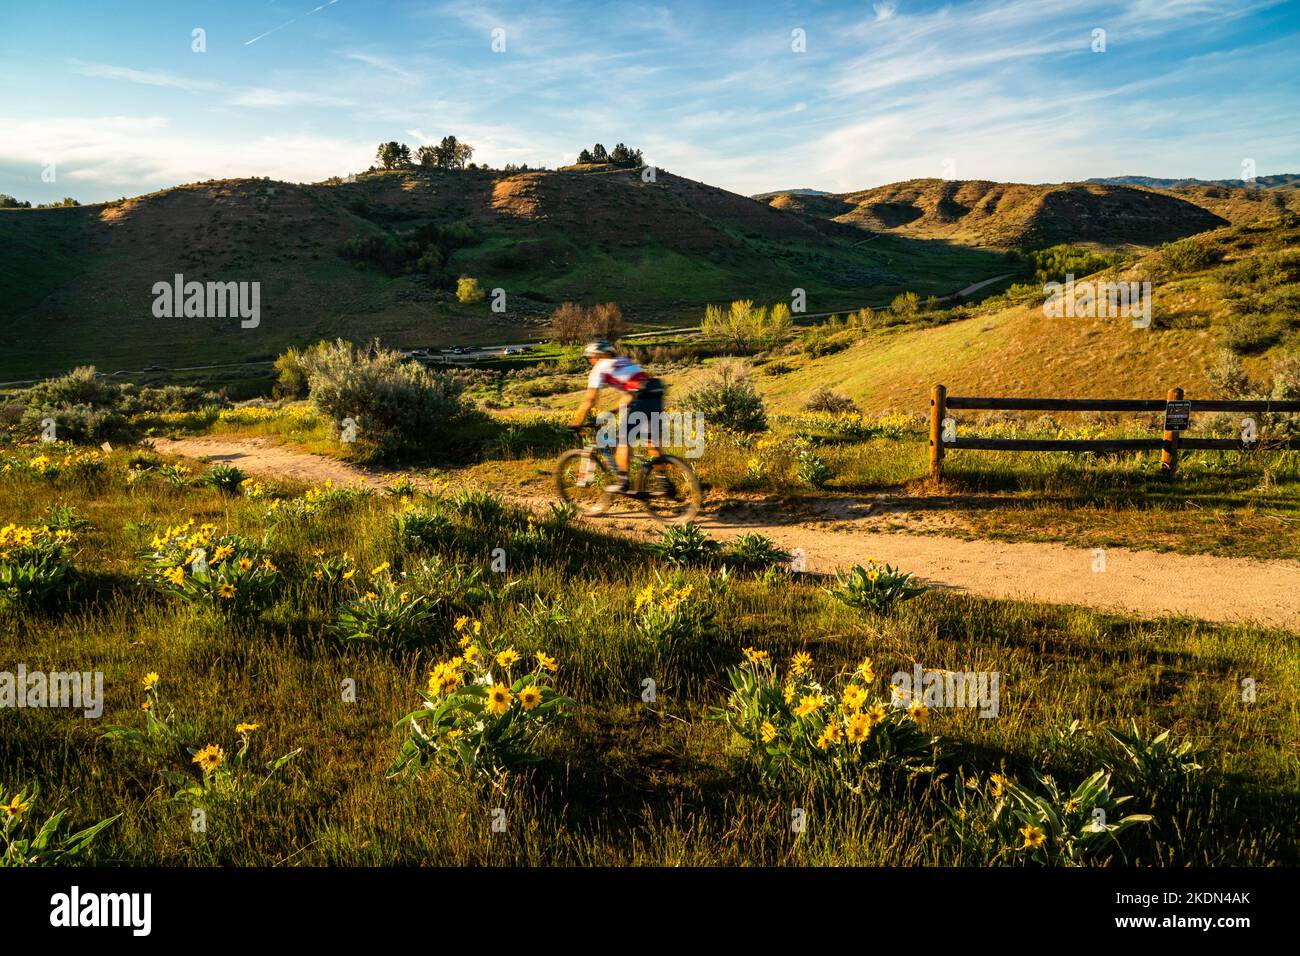 Mountain biker in the Military Reserve area in the Boise Foothills, late afternoon. Stock Photo